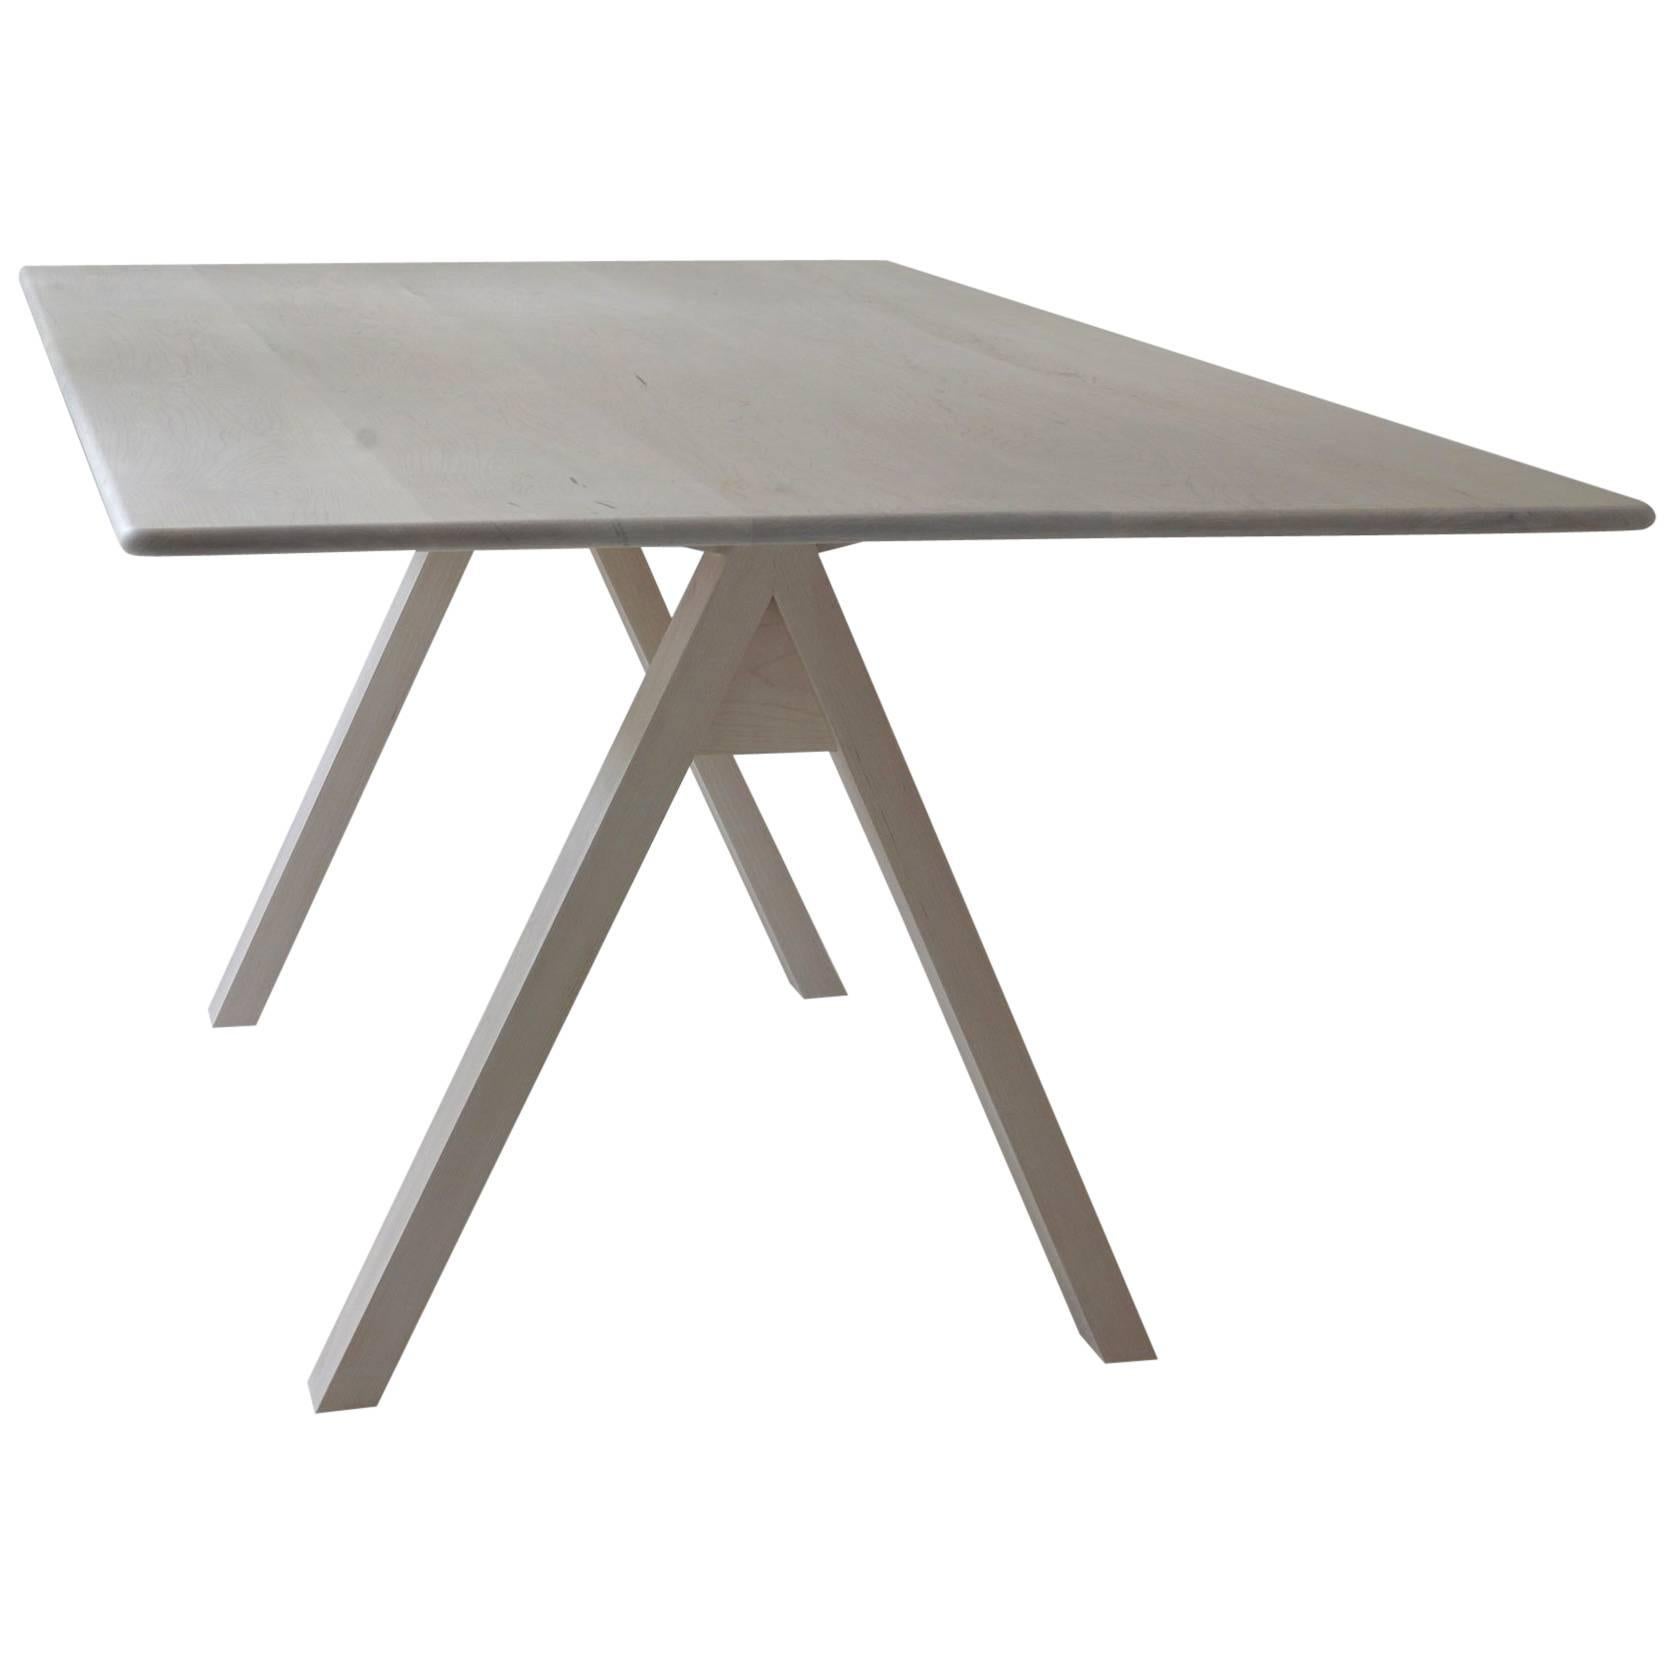 Spectral Dining Table / Bleached Maple Minimal Modern Trestle Table or Desk For Sale